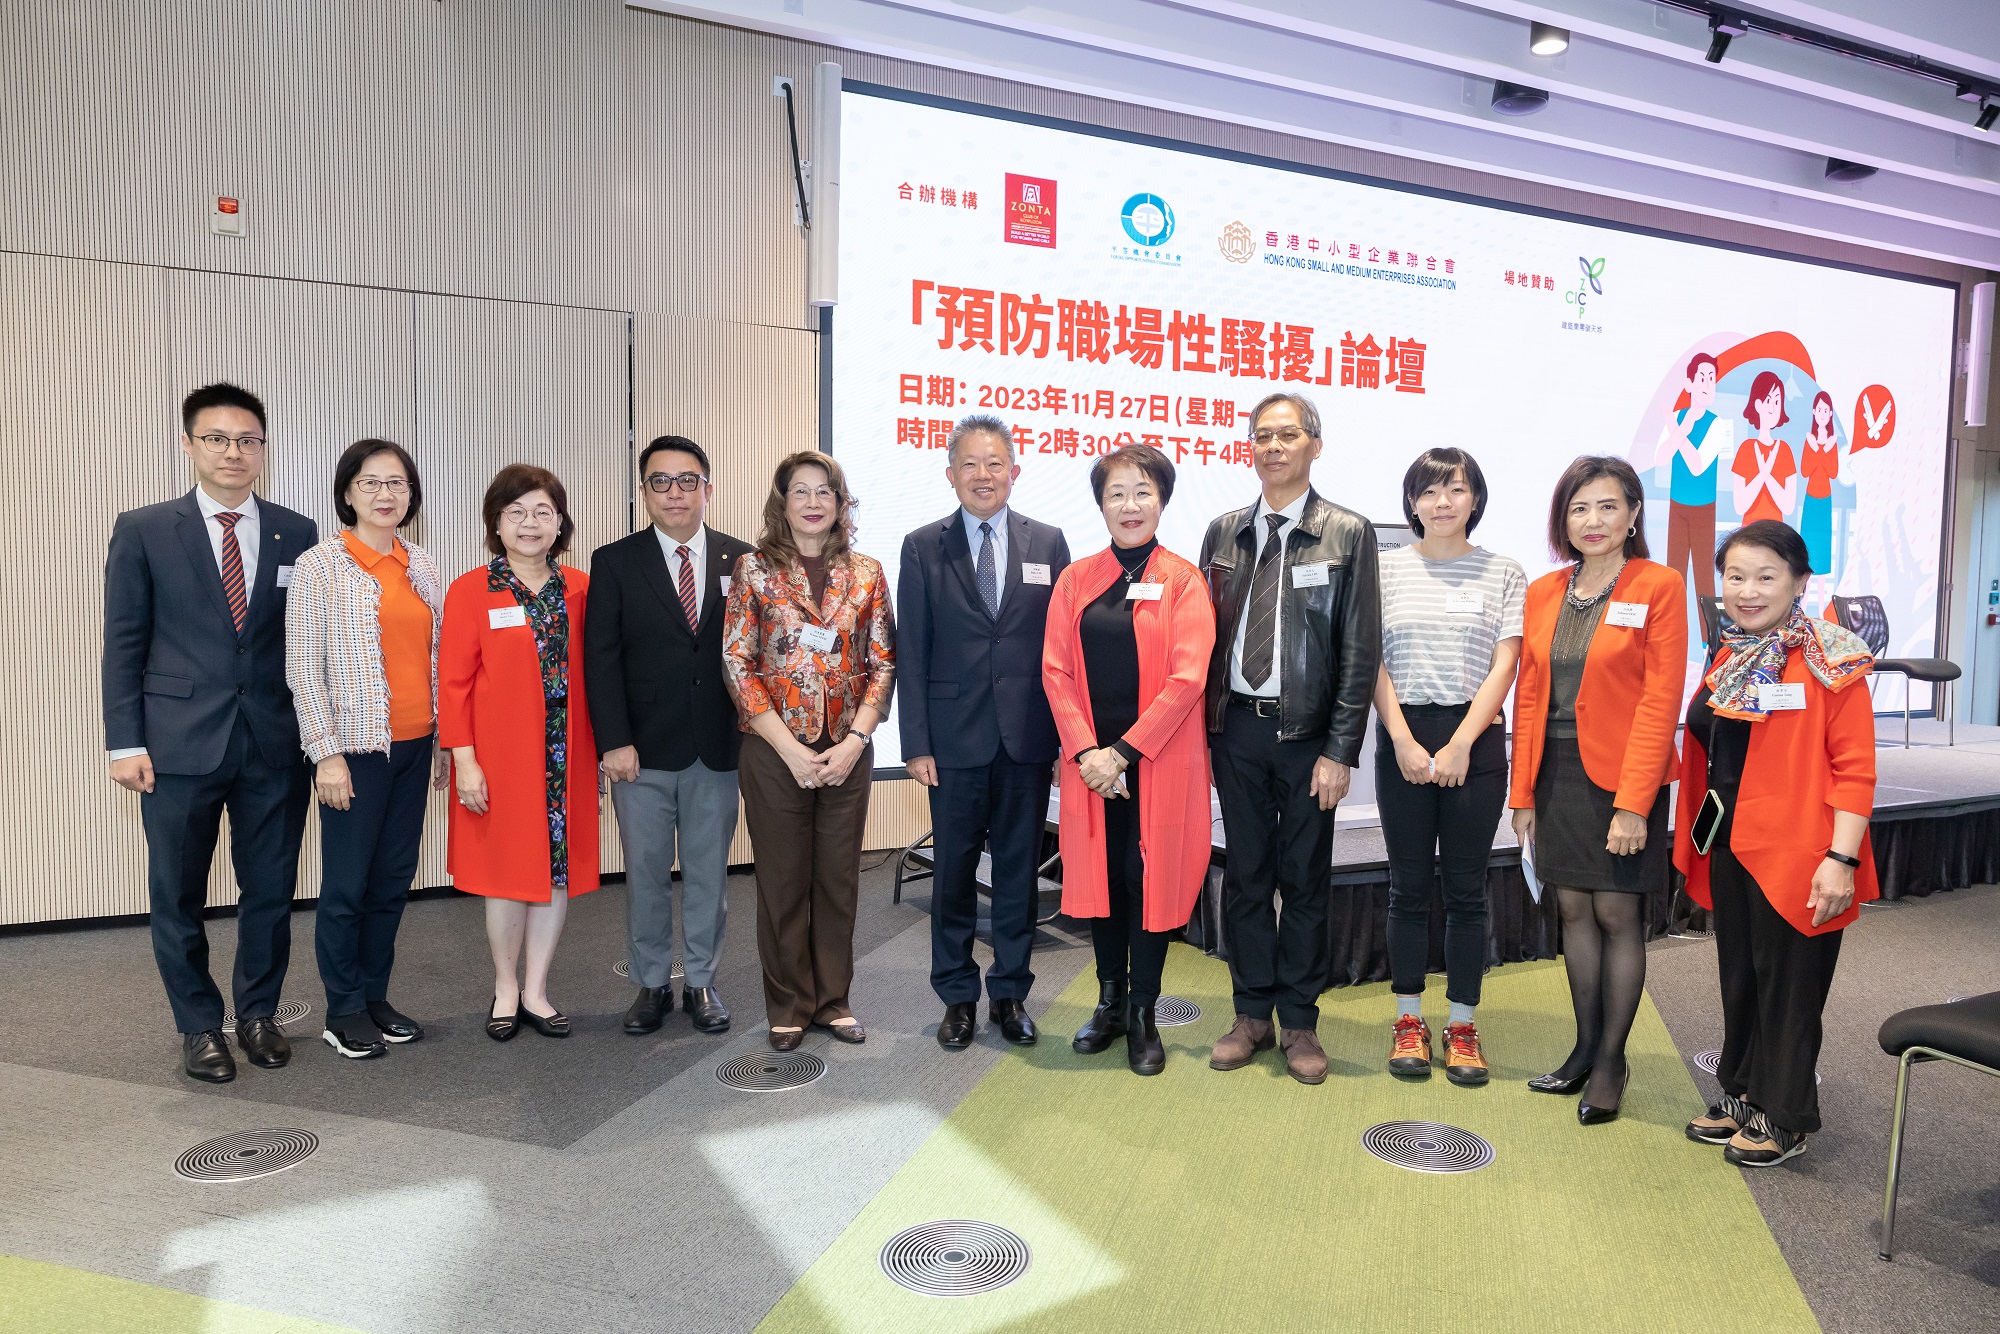 (from fourth left) Mr Andrew KWOK, Chairman of Hong Kong Small and Medium Enterprises (HKSME) Association; Ms Winnie TEOH, Chair of Advocacy Committee of Zonta Club of Kowloon and Past International Director of Zonta International; Mr Ricky CHU Man-kin, EOC Chairperson; Ms Ada FUNG, President of Zonta Club of Kowloon; Dr Ferrick CHU Chung-man, Executive Director (Operations) of the EOC; and Ms WONG Lok-yung, Organiser of Hong Kong Women Workers’ Association attend a forum on the prevention of workplace sexual harassment organised by the EOC, Zonta Club of Kowloon and HKSME Association.